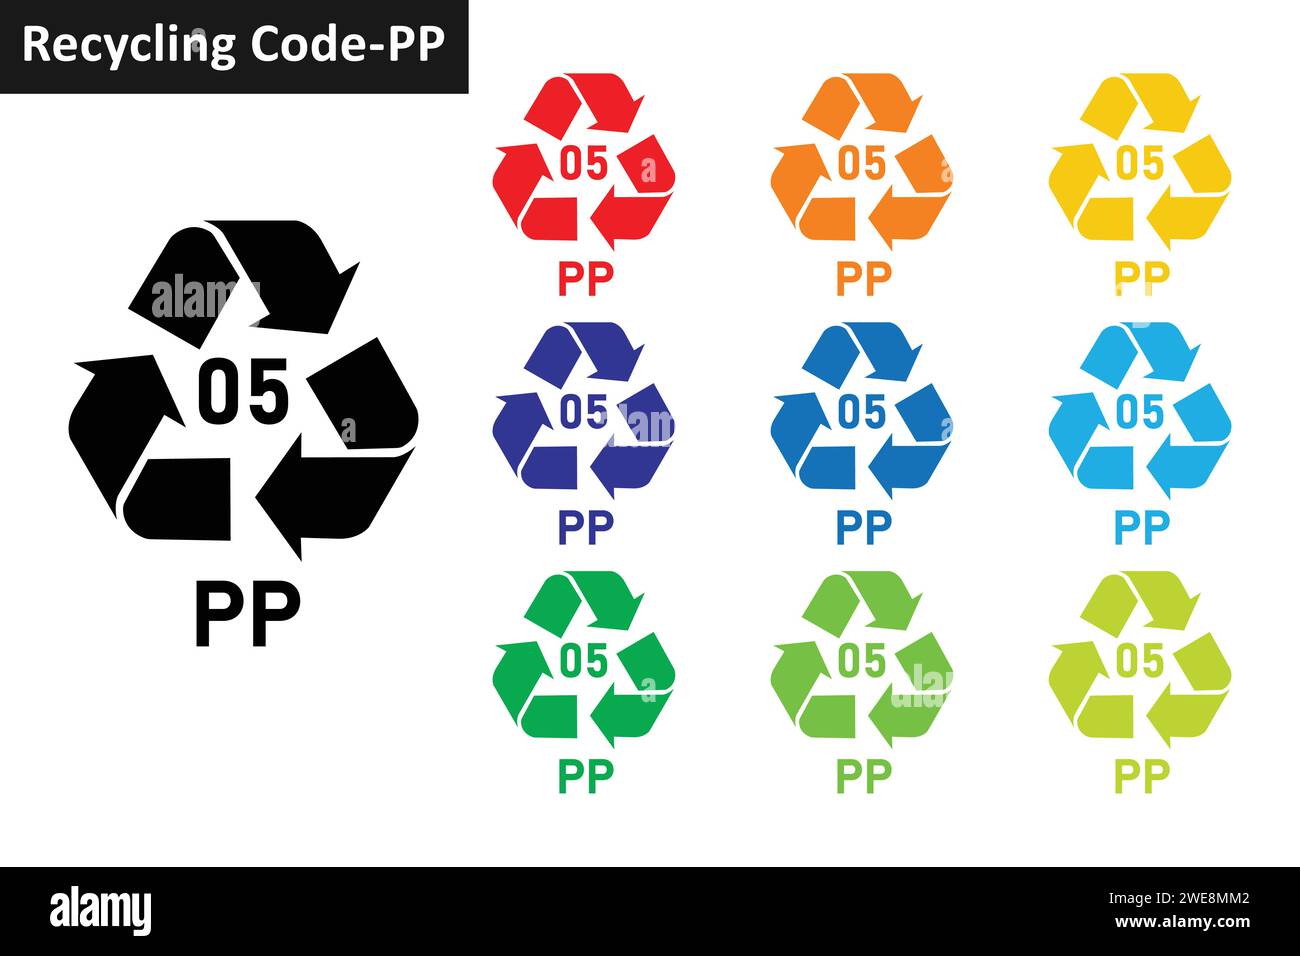 PP plastic recycling code icon set. Mobius Strip Plastic recycling symbol 05 PP. Plastic recycling code 05 icon collection in ten colors. Stock Vector